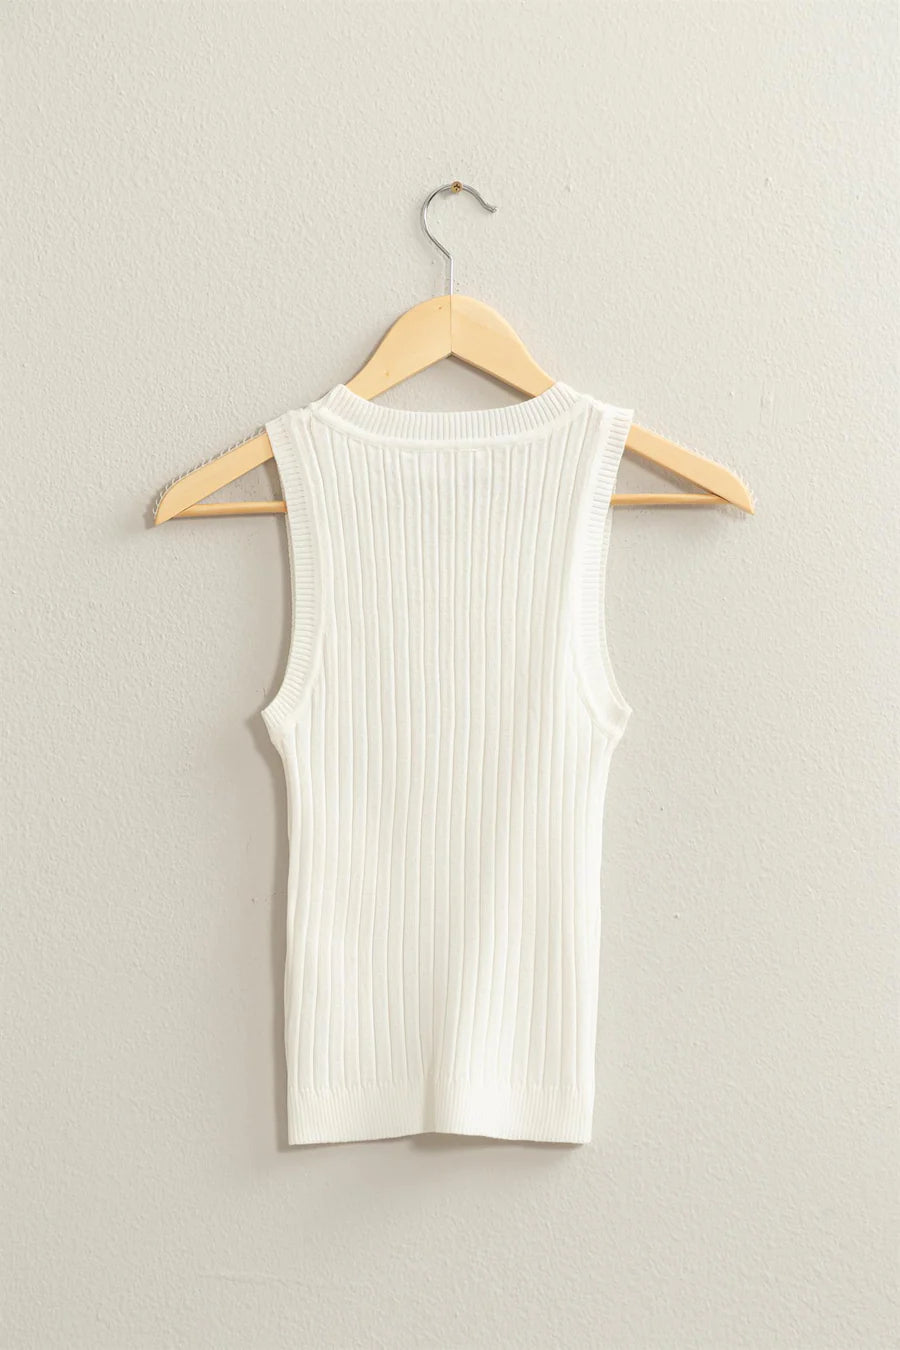 HYFVE INC. Women's Top OFFWHITE / S Essential Ribbed Tank Top || David's Clothing DZ24A871